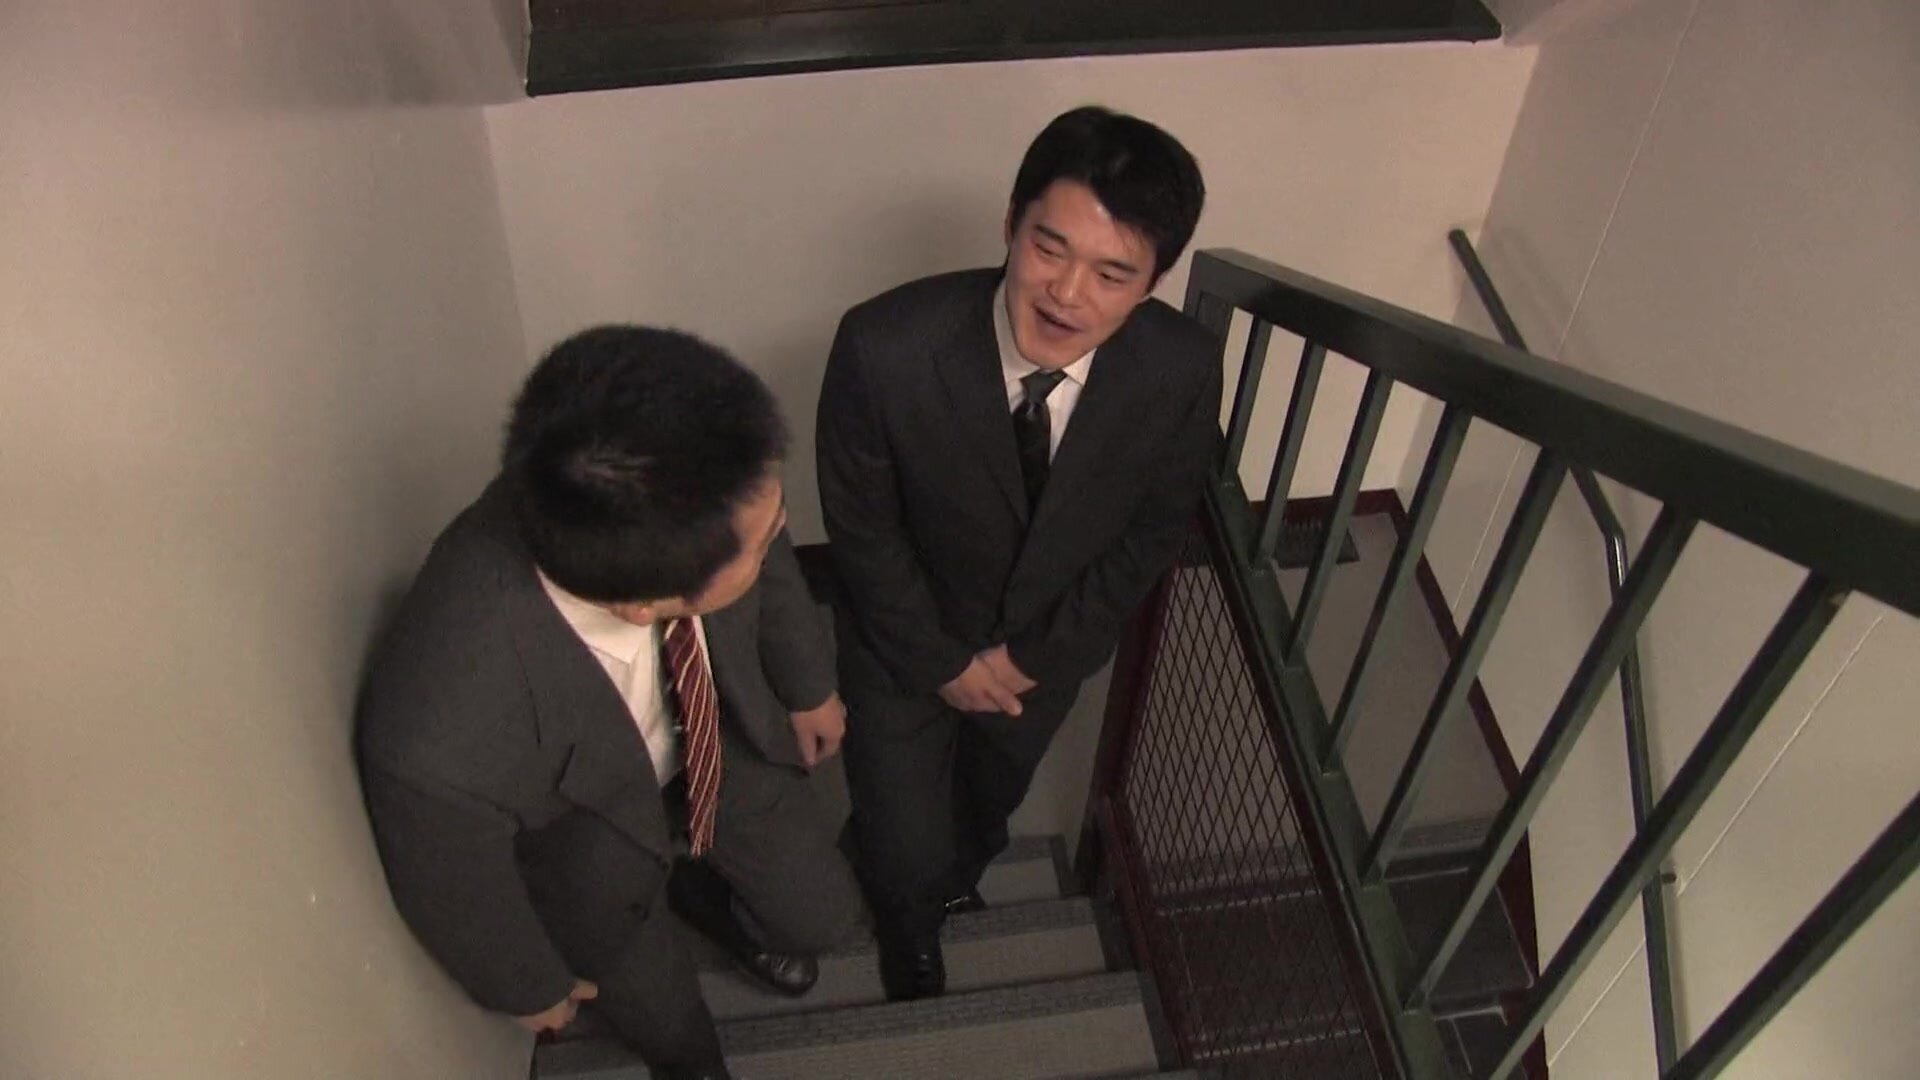 Japanese tight Pussies - Suits & ties makes her horny a